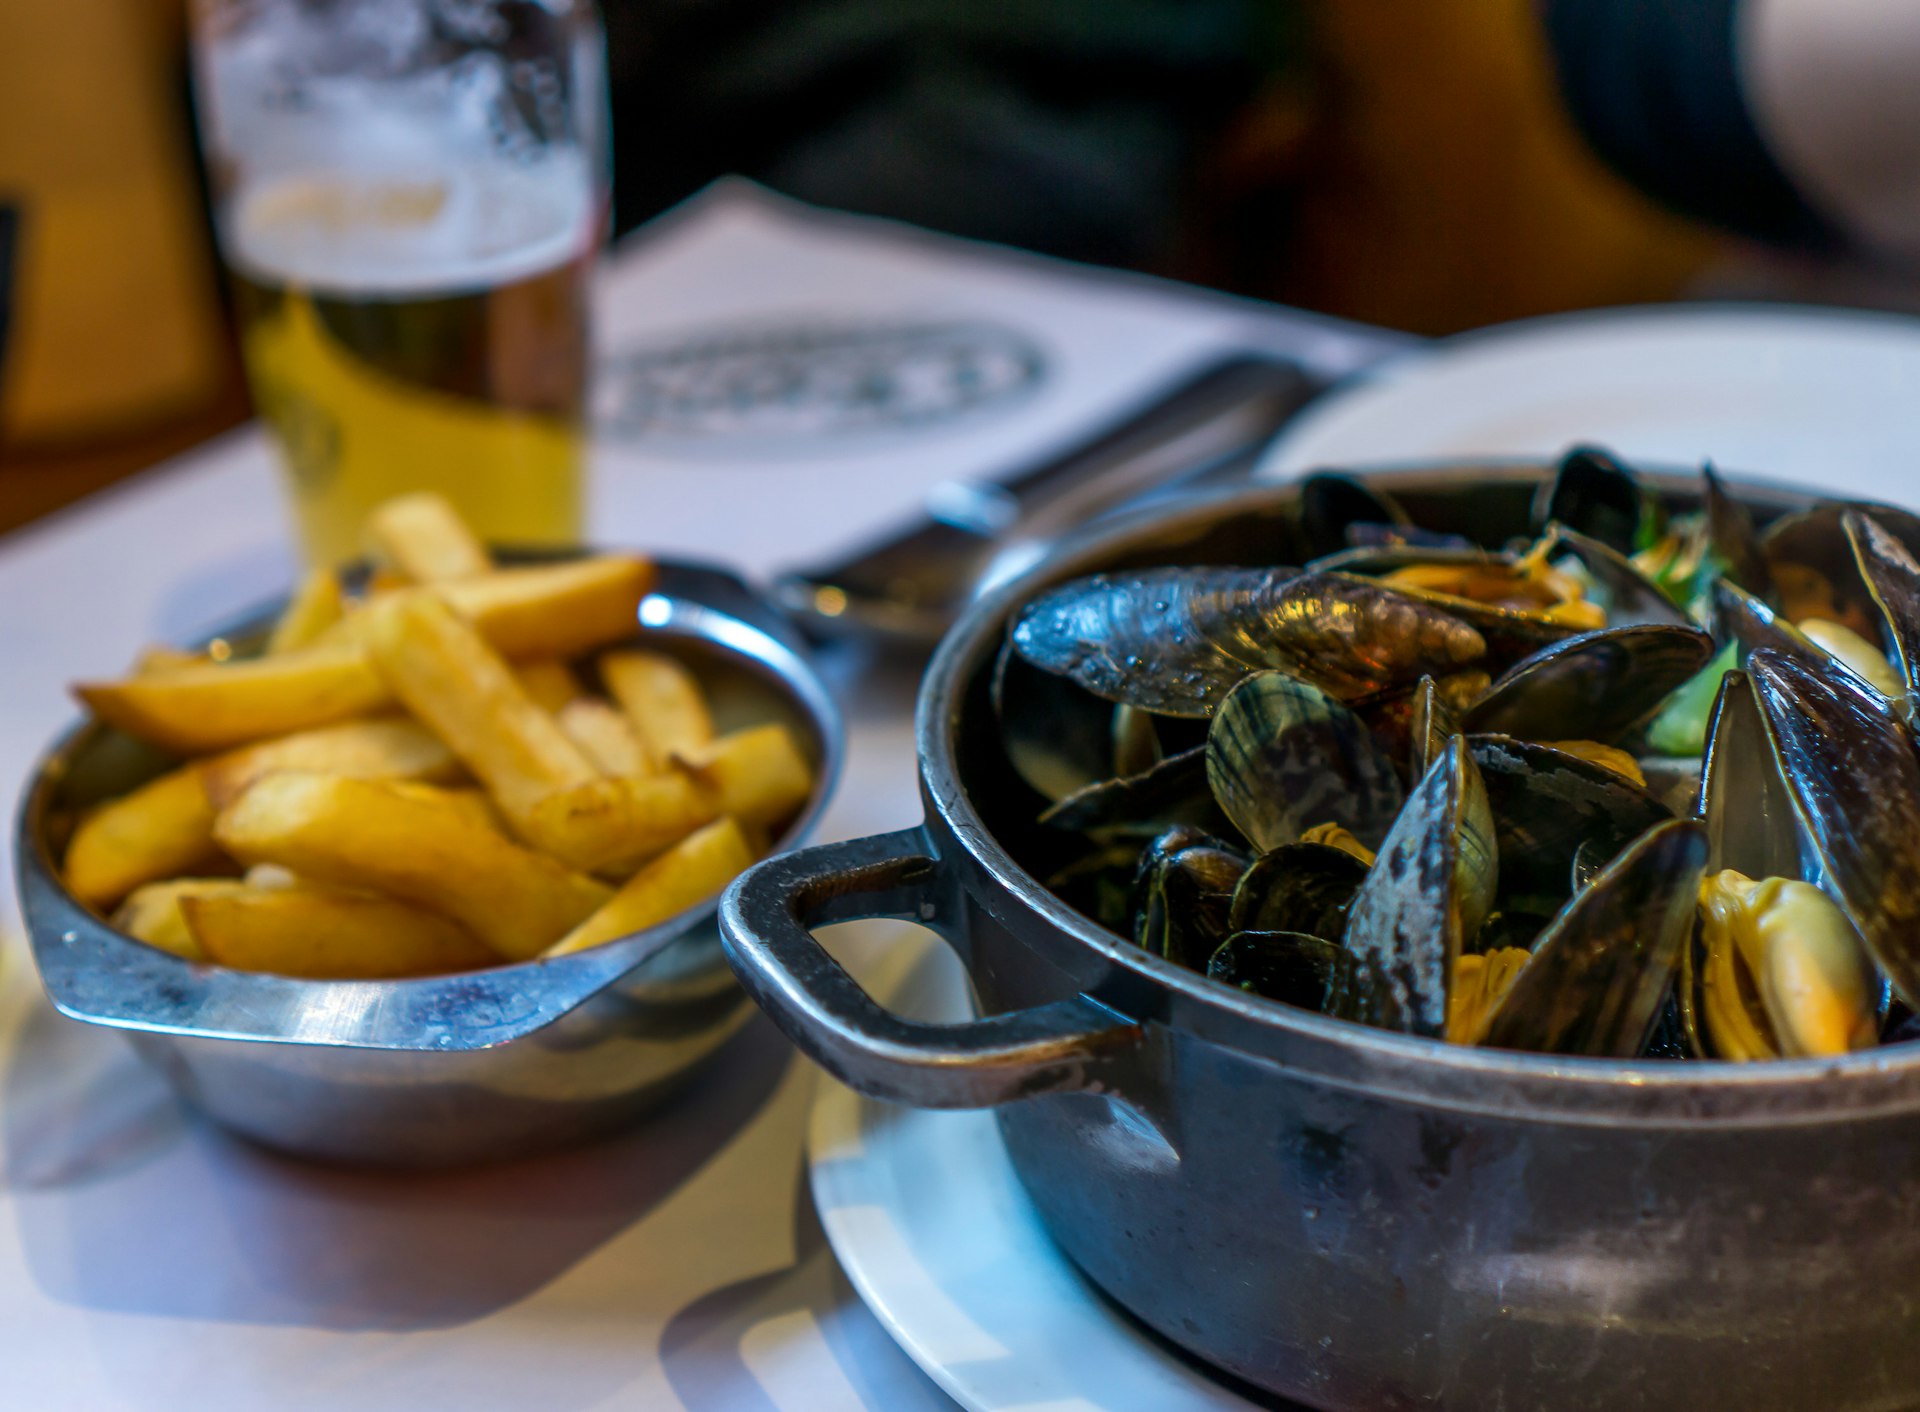 A bowl of mussels on a table near a plate of fries and a beer in a glass